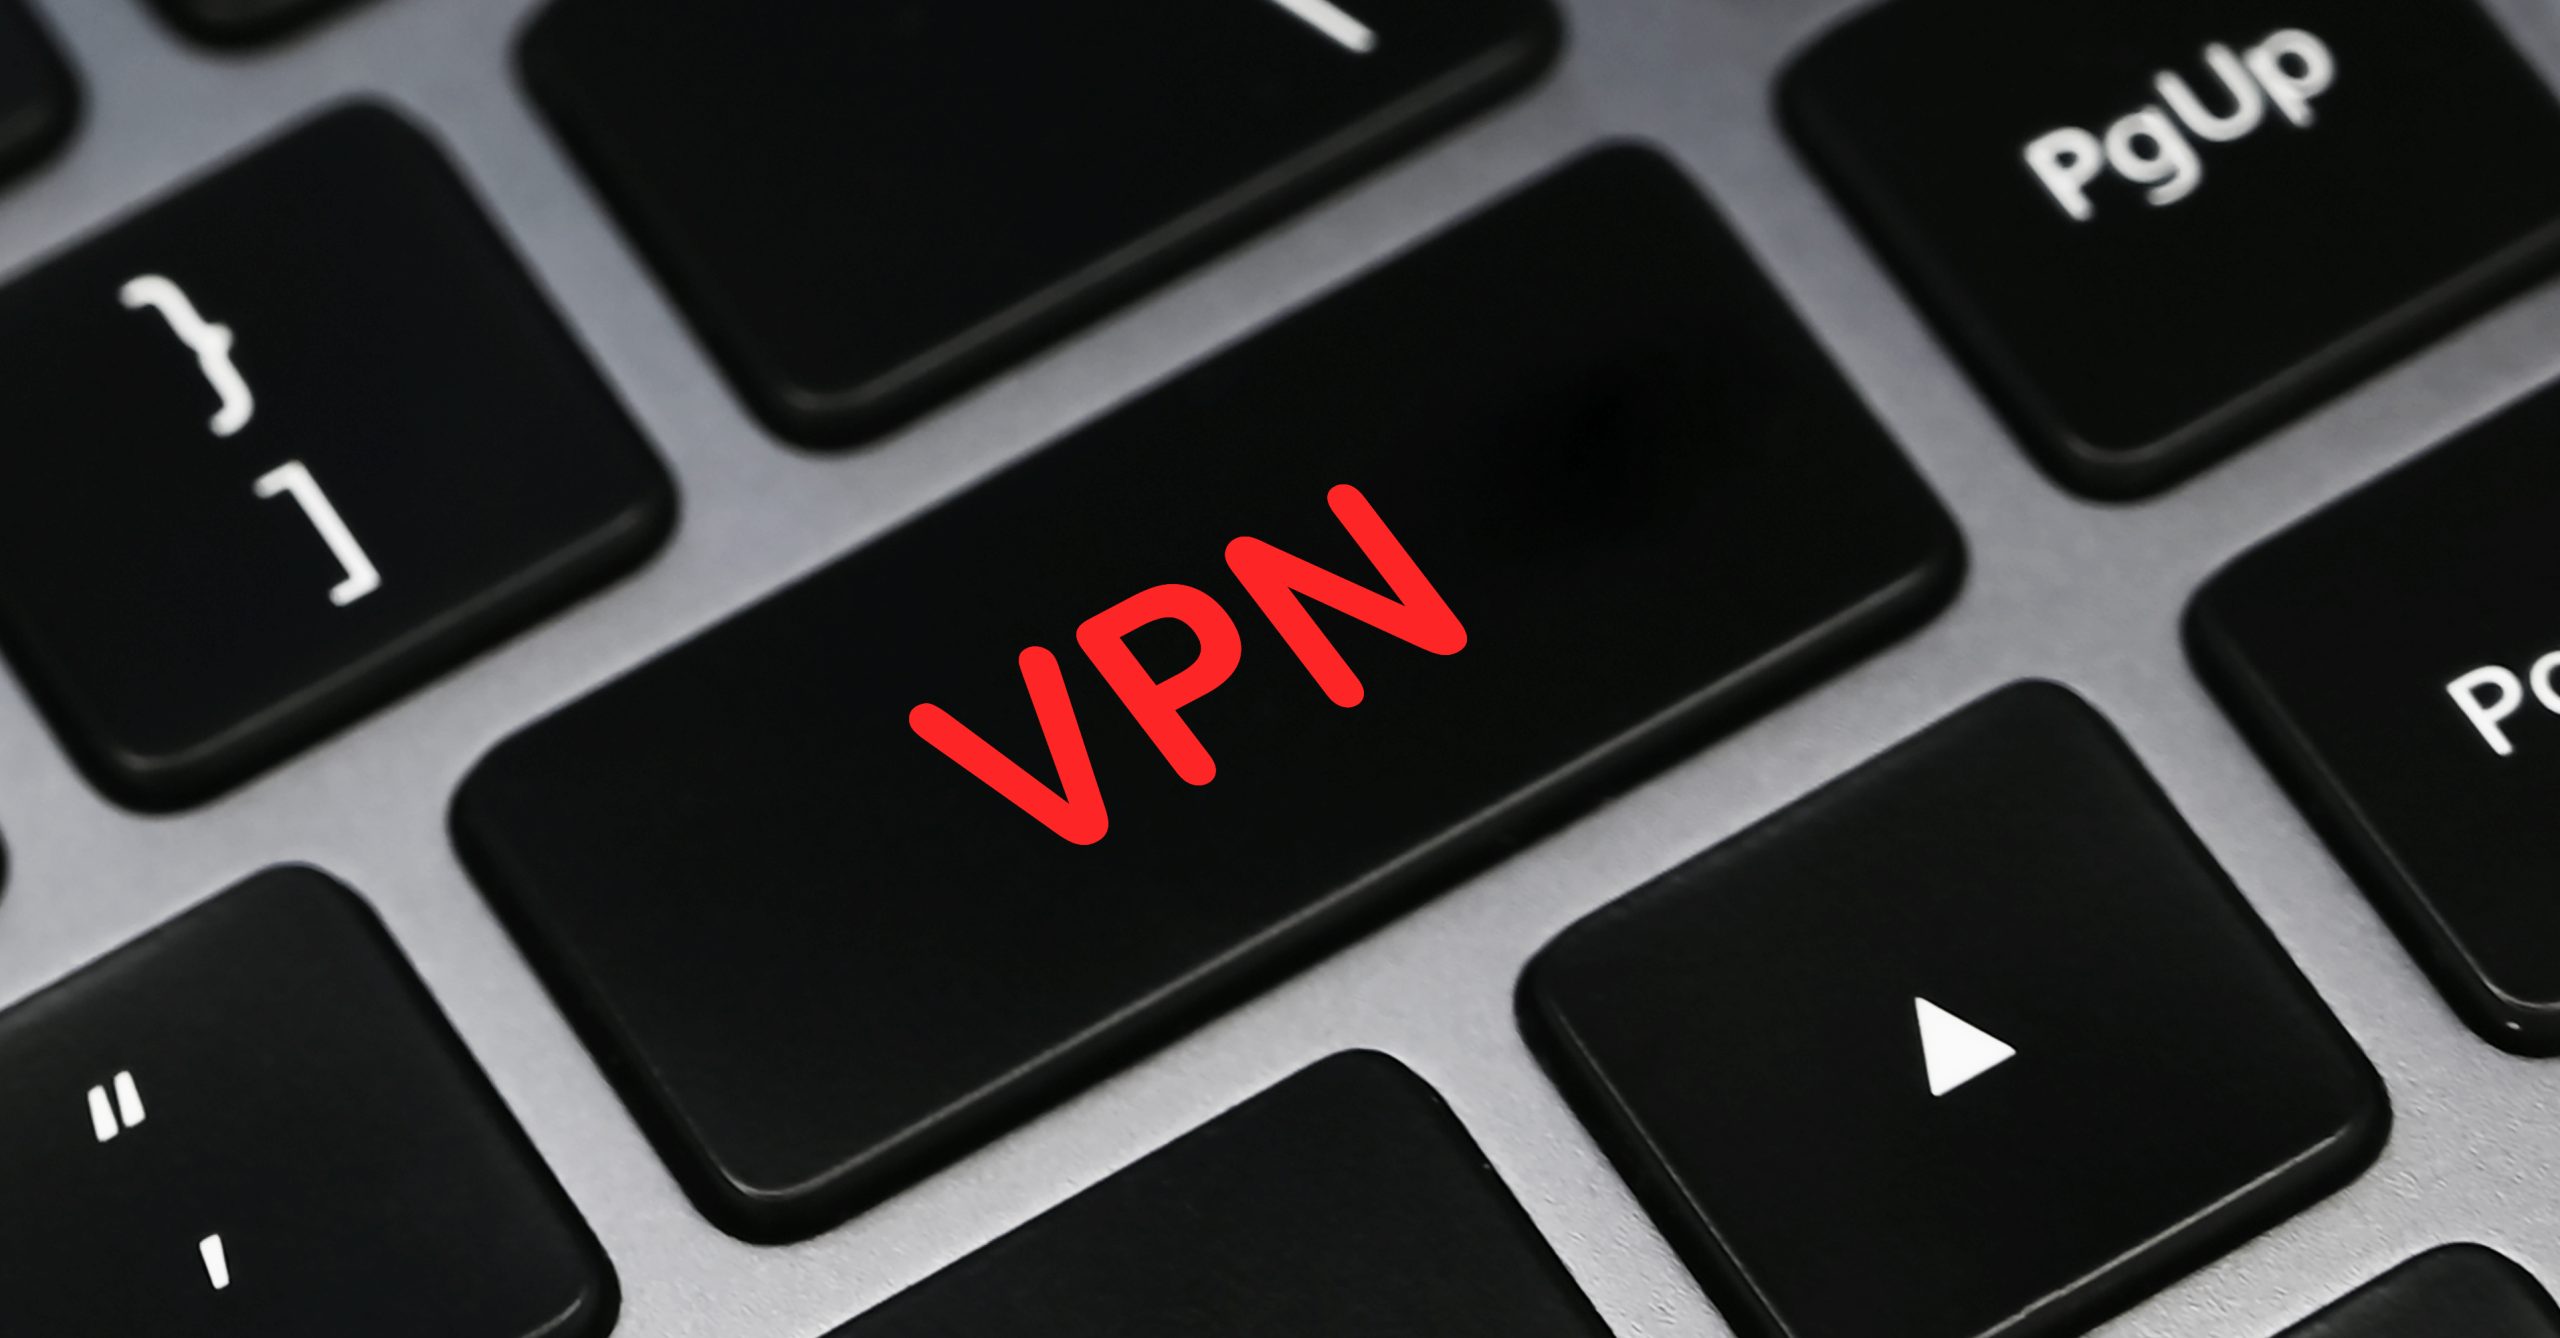 Advantages Of Using A VPN For Games